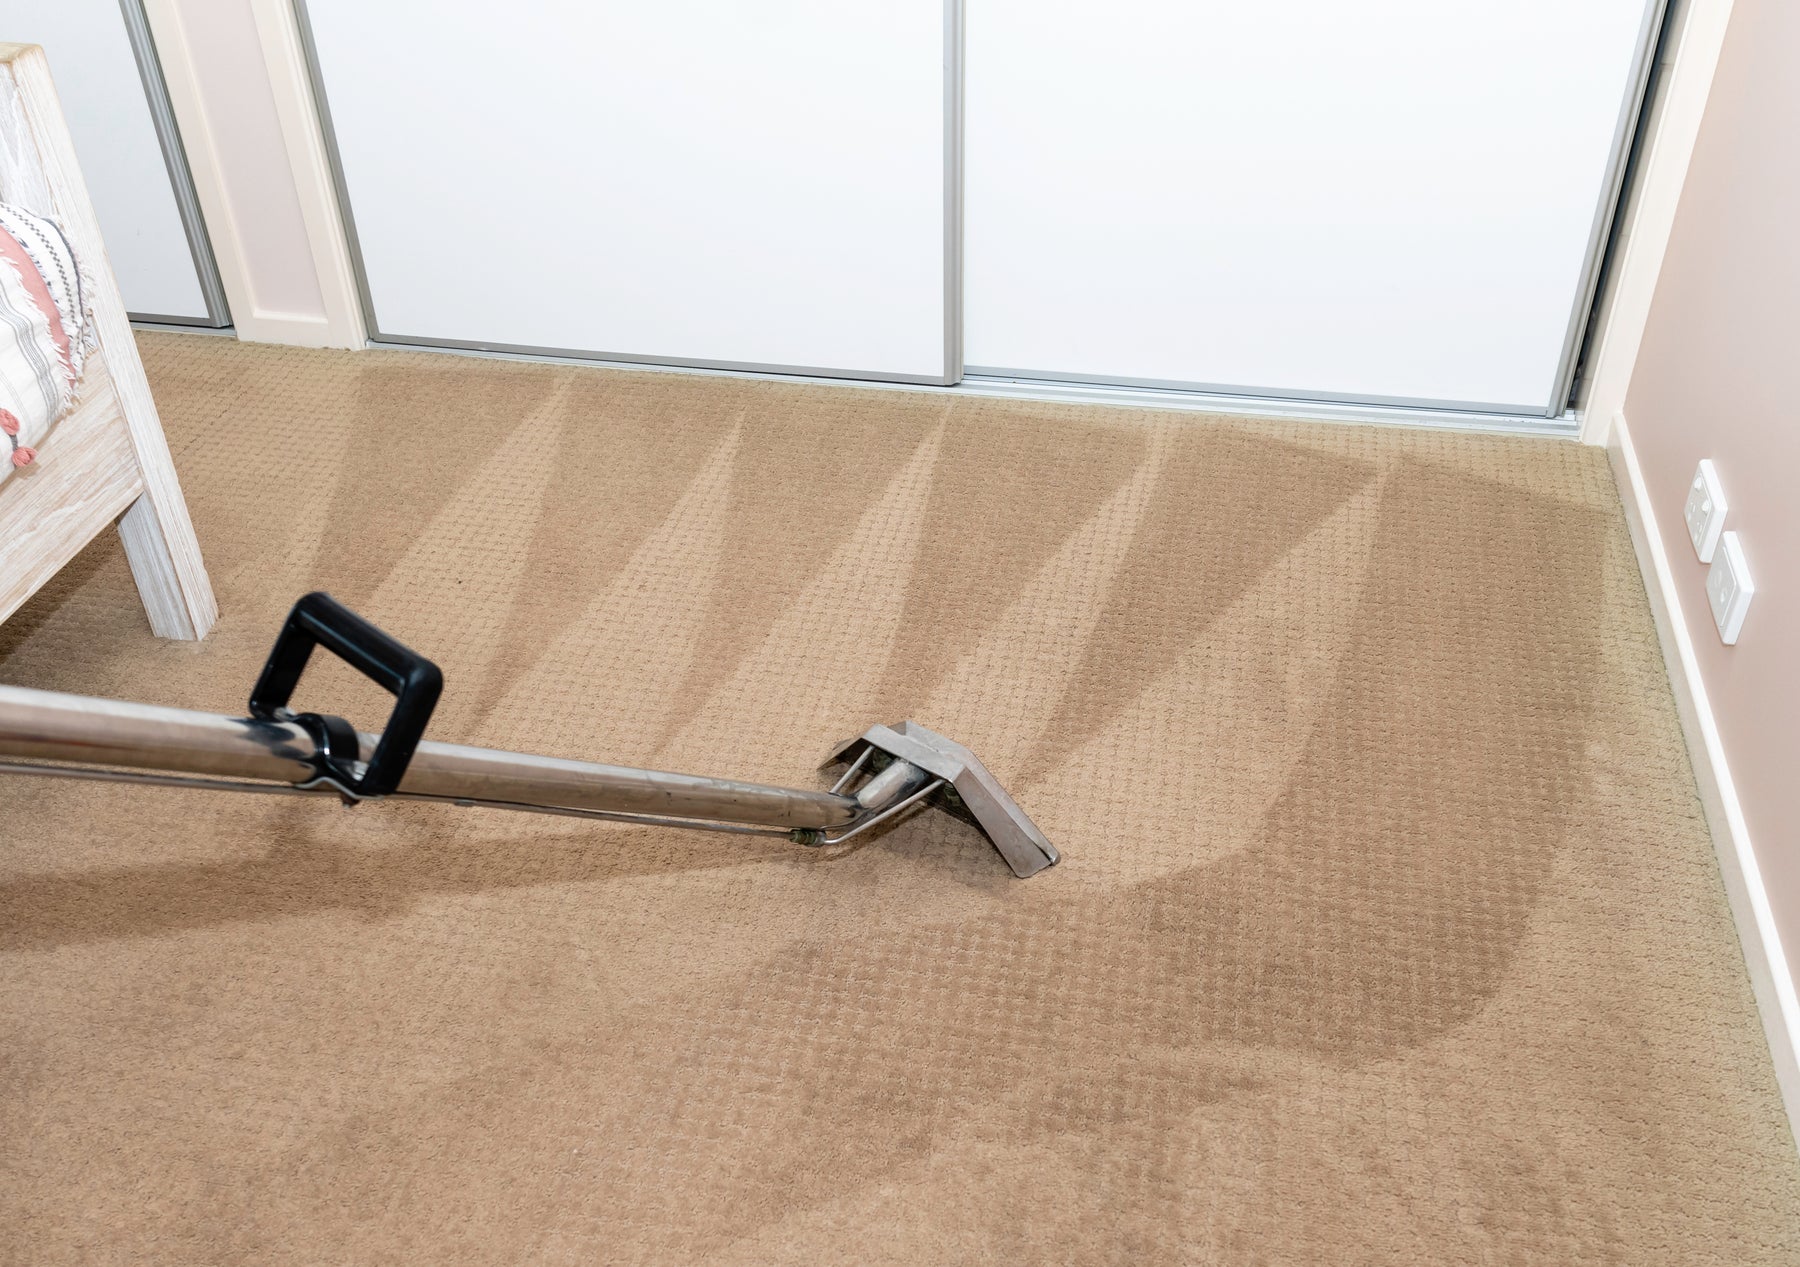 5 Tips for Carpet Cleaning Contractors to Stand Out and Succeed